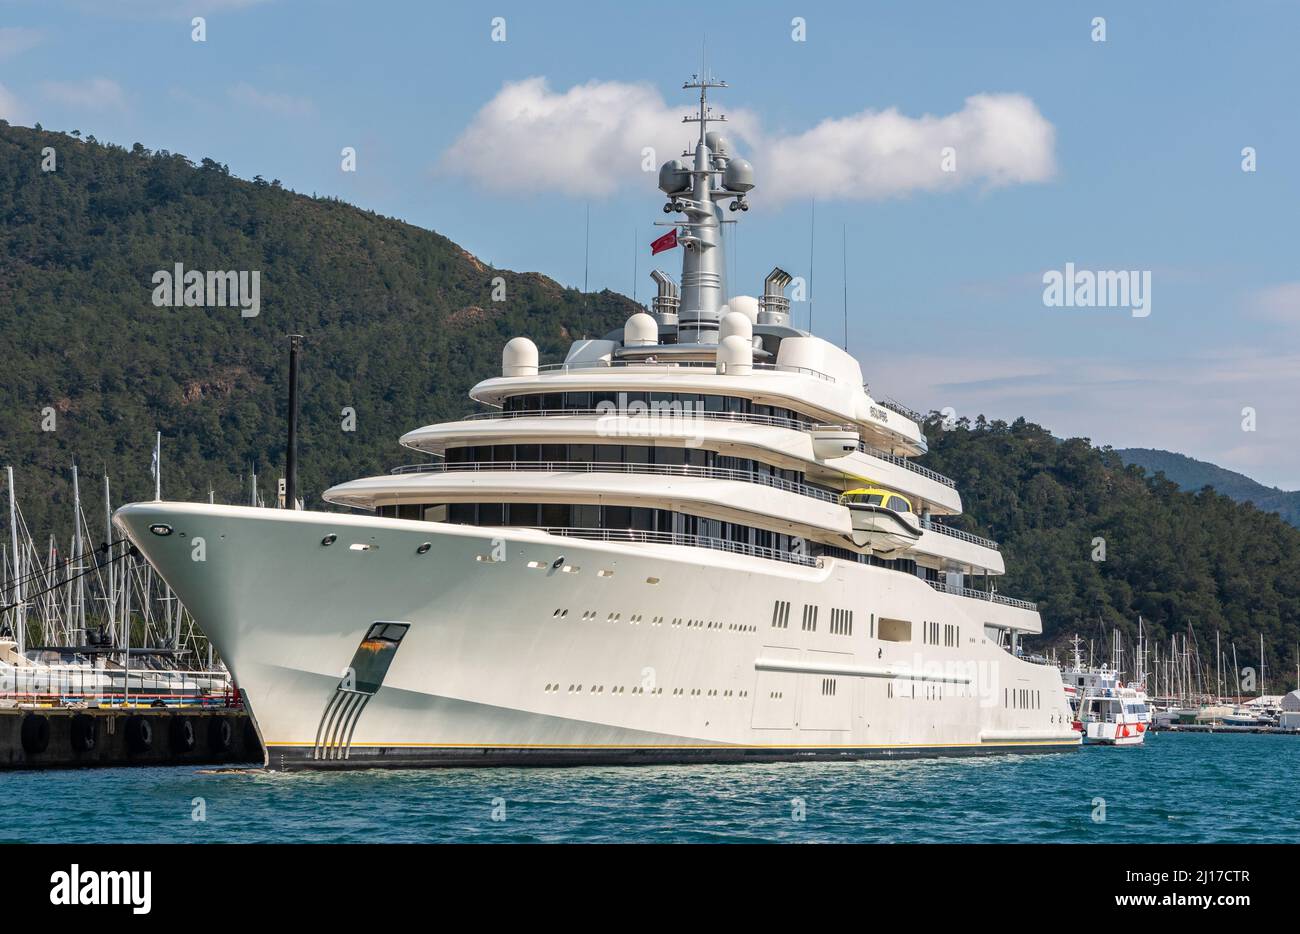 Marmaris, Turkey – March 23, 2022. M/Y Eclipse superyacht owned by  Russian oligarch Roman Abramovich, in Netsel Marina port of Marmaris, Turkey. Built by Blohm+Voss of Hamburg, Germany and delivered to Abramovich on 9 December 2010, the yacht is the fourth longest afloat. The yacht's cost has been estimated at €340 million. Eclipse has two helicopter pads, 24 guest cabins, two swimming pools, several hot tubs, and a disco hall. It is also equipped with three launch boats and a mini-submarine that is capable of submerging to 50 metres (160 ft). Approximately 70 crew members are needed to opera Stock Photo